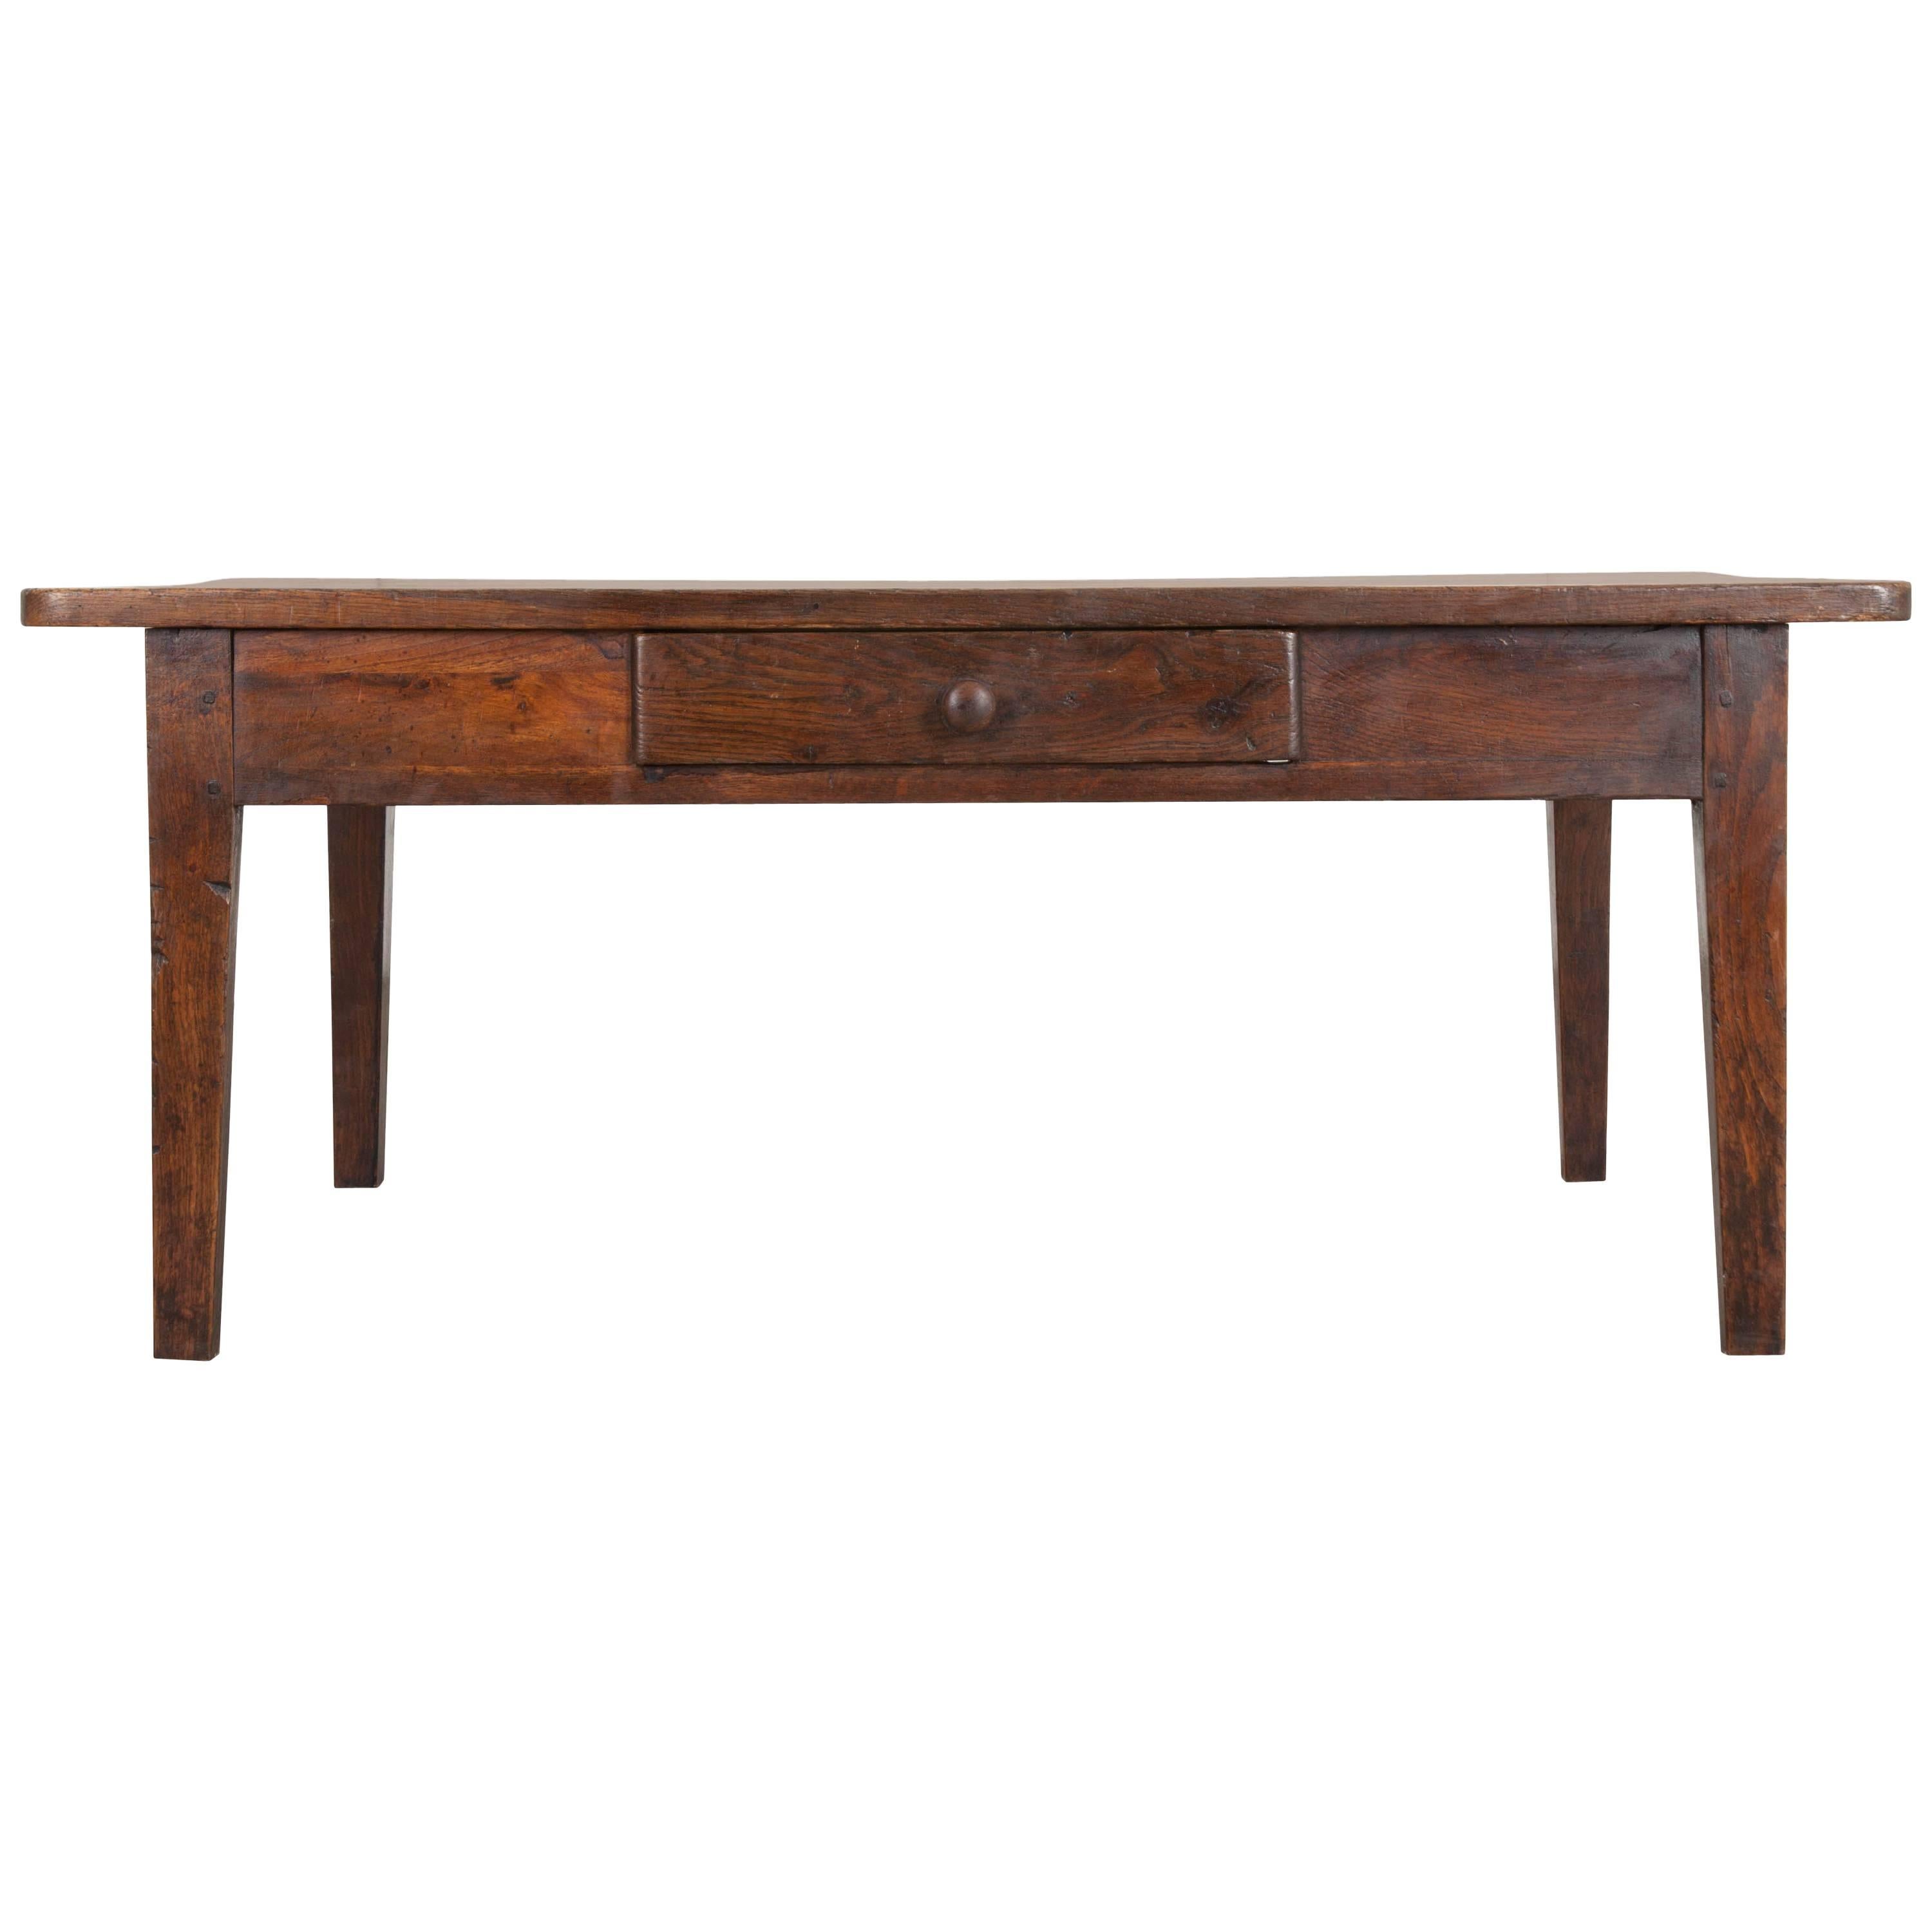 French 19th Century Oak Low Table from Burgundy